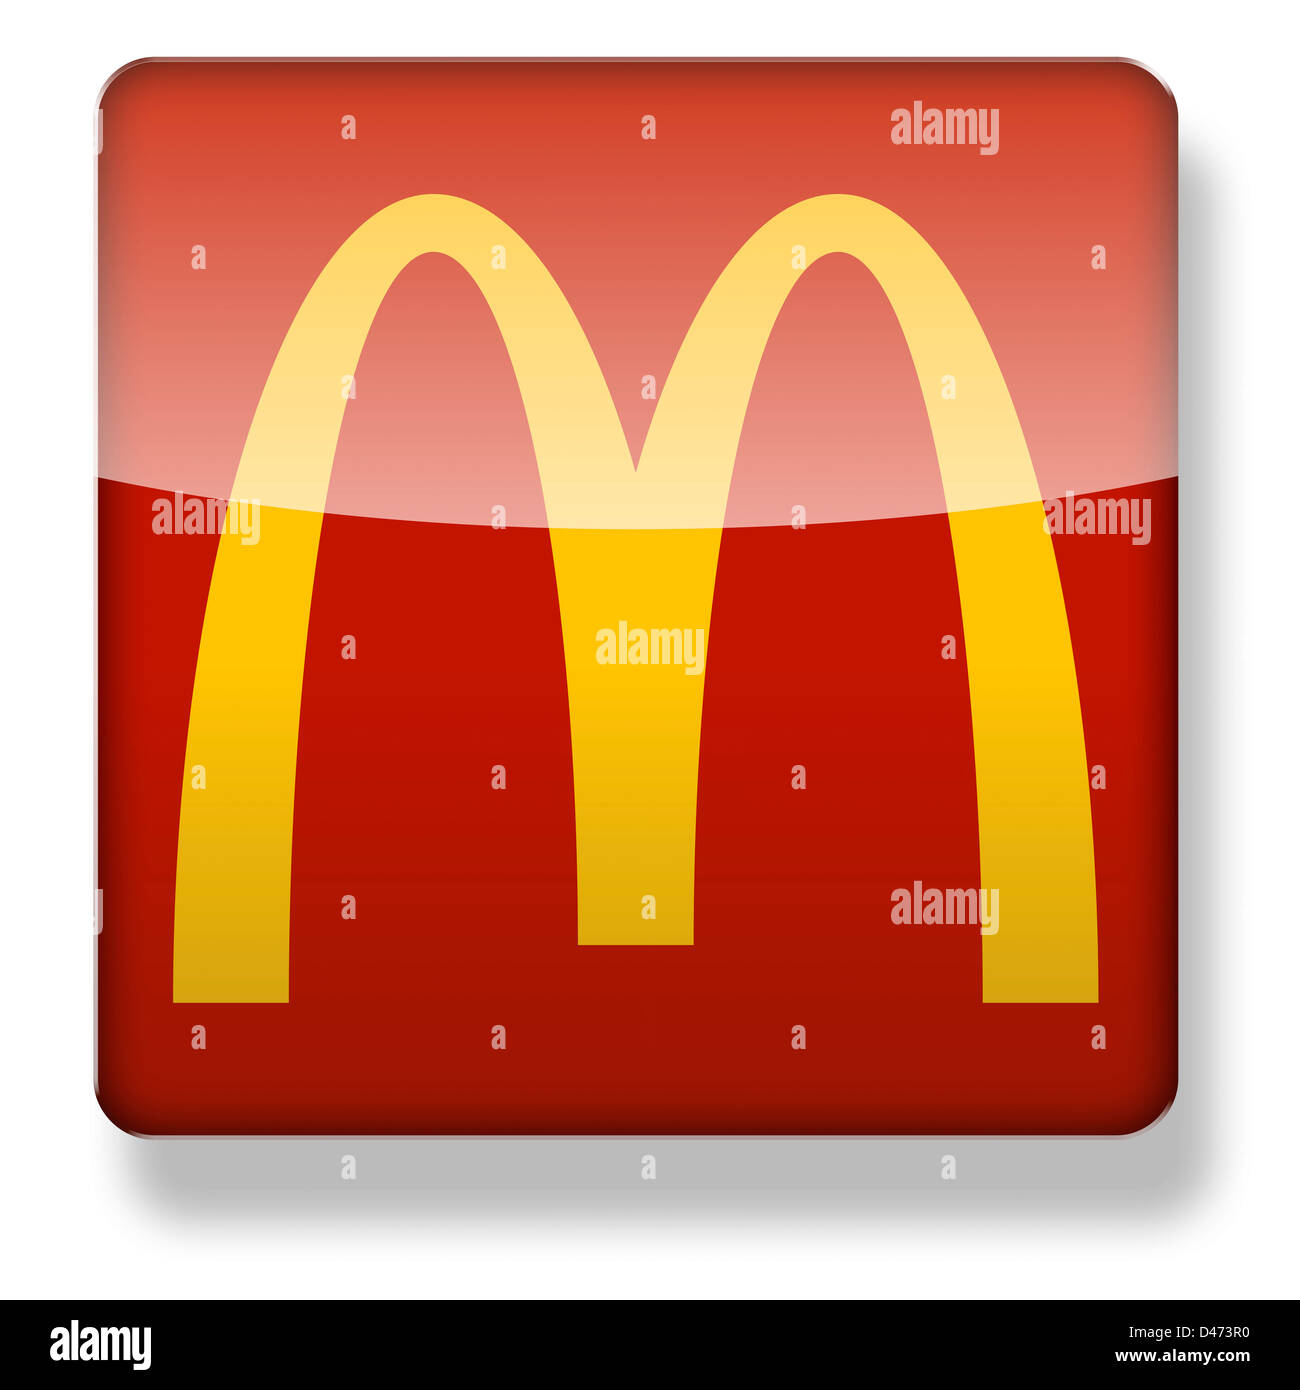 McDonalds logo as an app icon. Clipping path included. Stock Photo